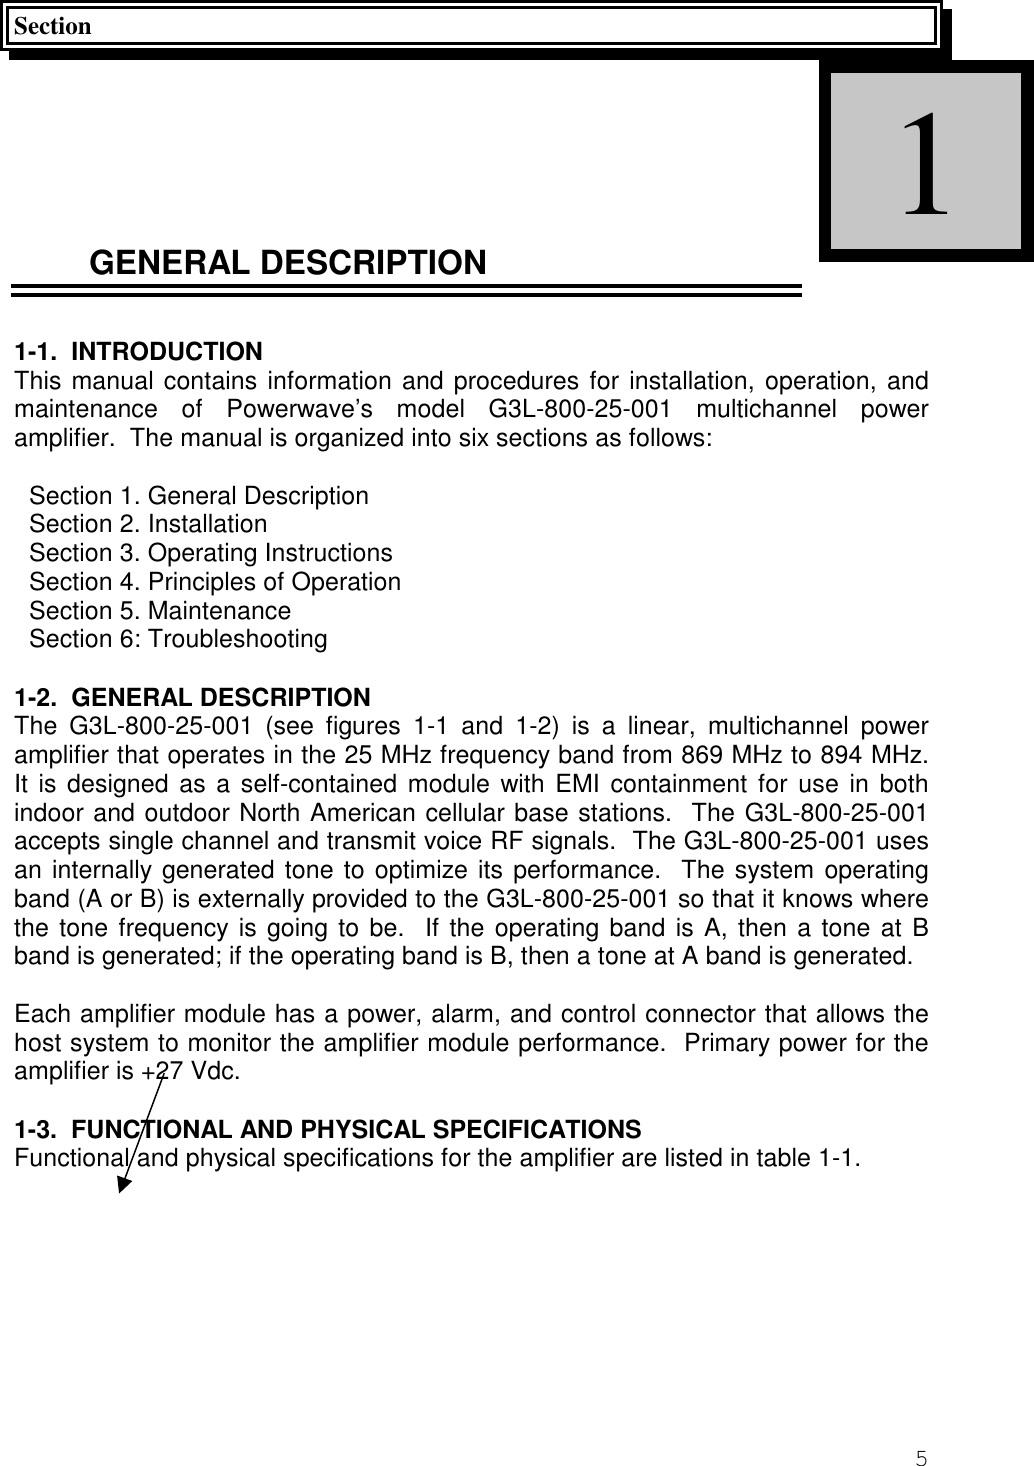 5SectionGENERAL DESCRIPTION1-1.  INTRODUCTIONThis manual contains information and procedures for installation, operation, andmaintenance of Powerwave’s model G3L-800-25-001 multichannel poweramplifier.  The manual is organized into six sections as follows:Section 1. General DescriptionSection 2. InstallationSection 3. Operating InstructionsSection 4. Principles of OperationSection 5. MaintenanceSection 6: Troubleshooting1-2.  GENERAL DESCRIPTIONThe G3L-800-25-001 (see figures 1-1 and 1-2) is a linear, multichannel poweramplifier that operates in the 25 MHz frequency band from 869 MHz to 894 MHz.It is designed as a self-contained module with EMI containment for use in bothindoor and outdoor North American cellular base stations.  The G3L-800-25-001accepts single channel and transmit voice RF signals.  The G3L-800-25-001 usesan internally generated tone to optimize its performance.  The system operatingband (A or B) is externally provided to the G3L-800-25-001 so that it knows wherethe tone frequency is going to be.  If the operating band is A, then a tone at Bband is generated; if the operating band is B, then a tone at A band is generated.Each amplifier module has a power, alarm, and control connector that allows thehost system to monitor the amplifier module performance.  Primary power for theamplifier is +27 Vdc.1-3.  FUNCTIONAL AND PHYSICAL SPECIFICATIONSFunctional and physical specifications for the amplifier are listed in table 1-1.1